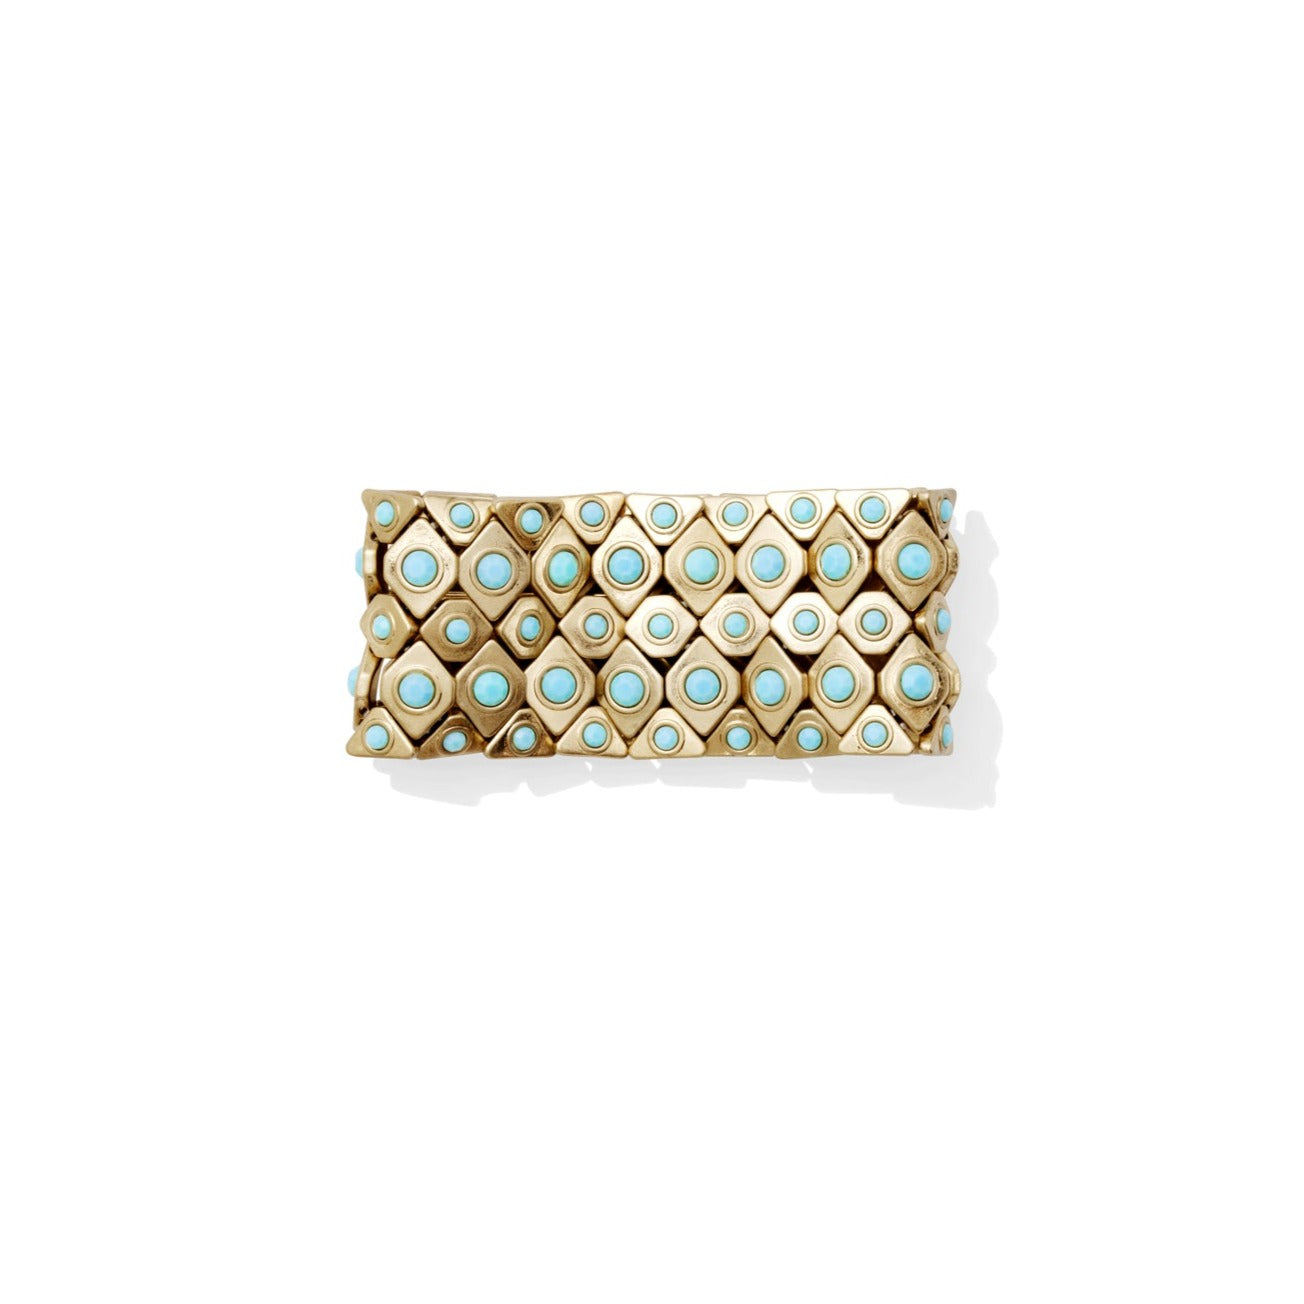 Turquoise-colored beads on a gold stretchy bracelet